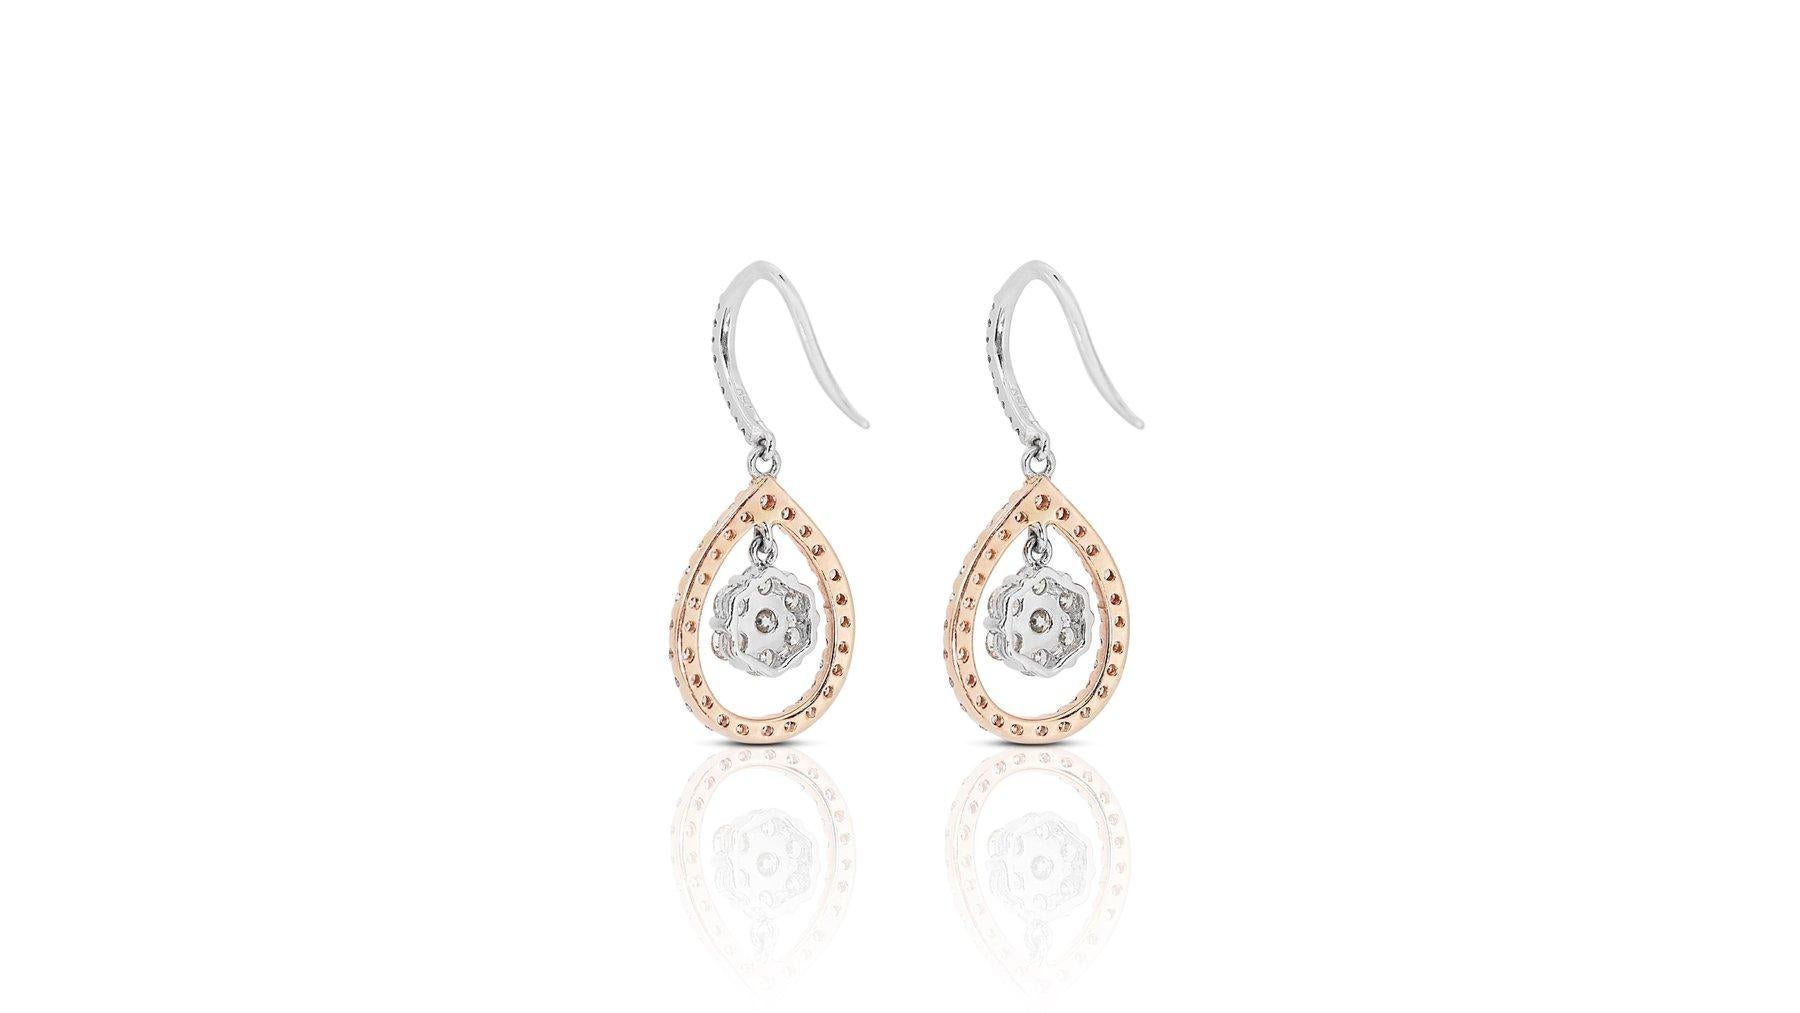 Stunning Diamond Earrings with Dazzling 2.35 ct Round Brilliant cut Diamond For Sale 1